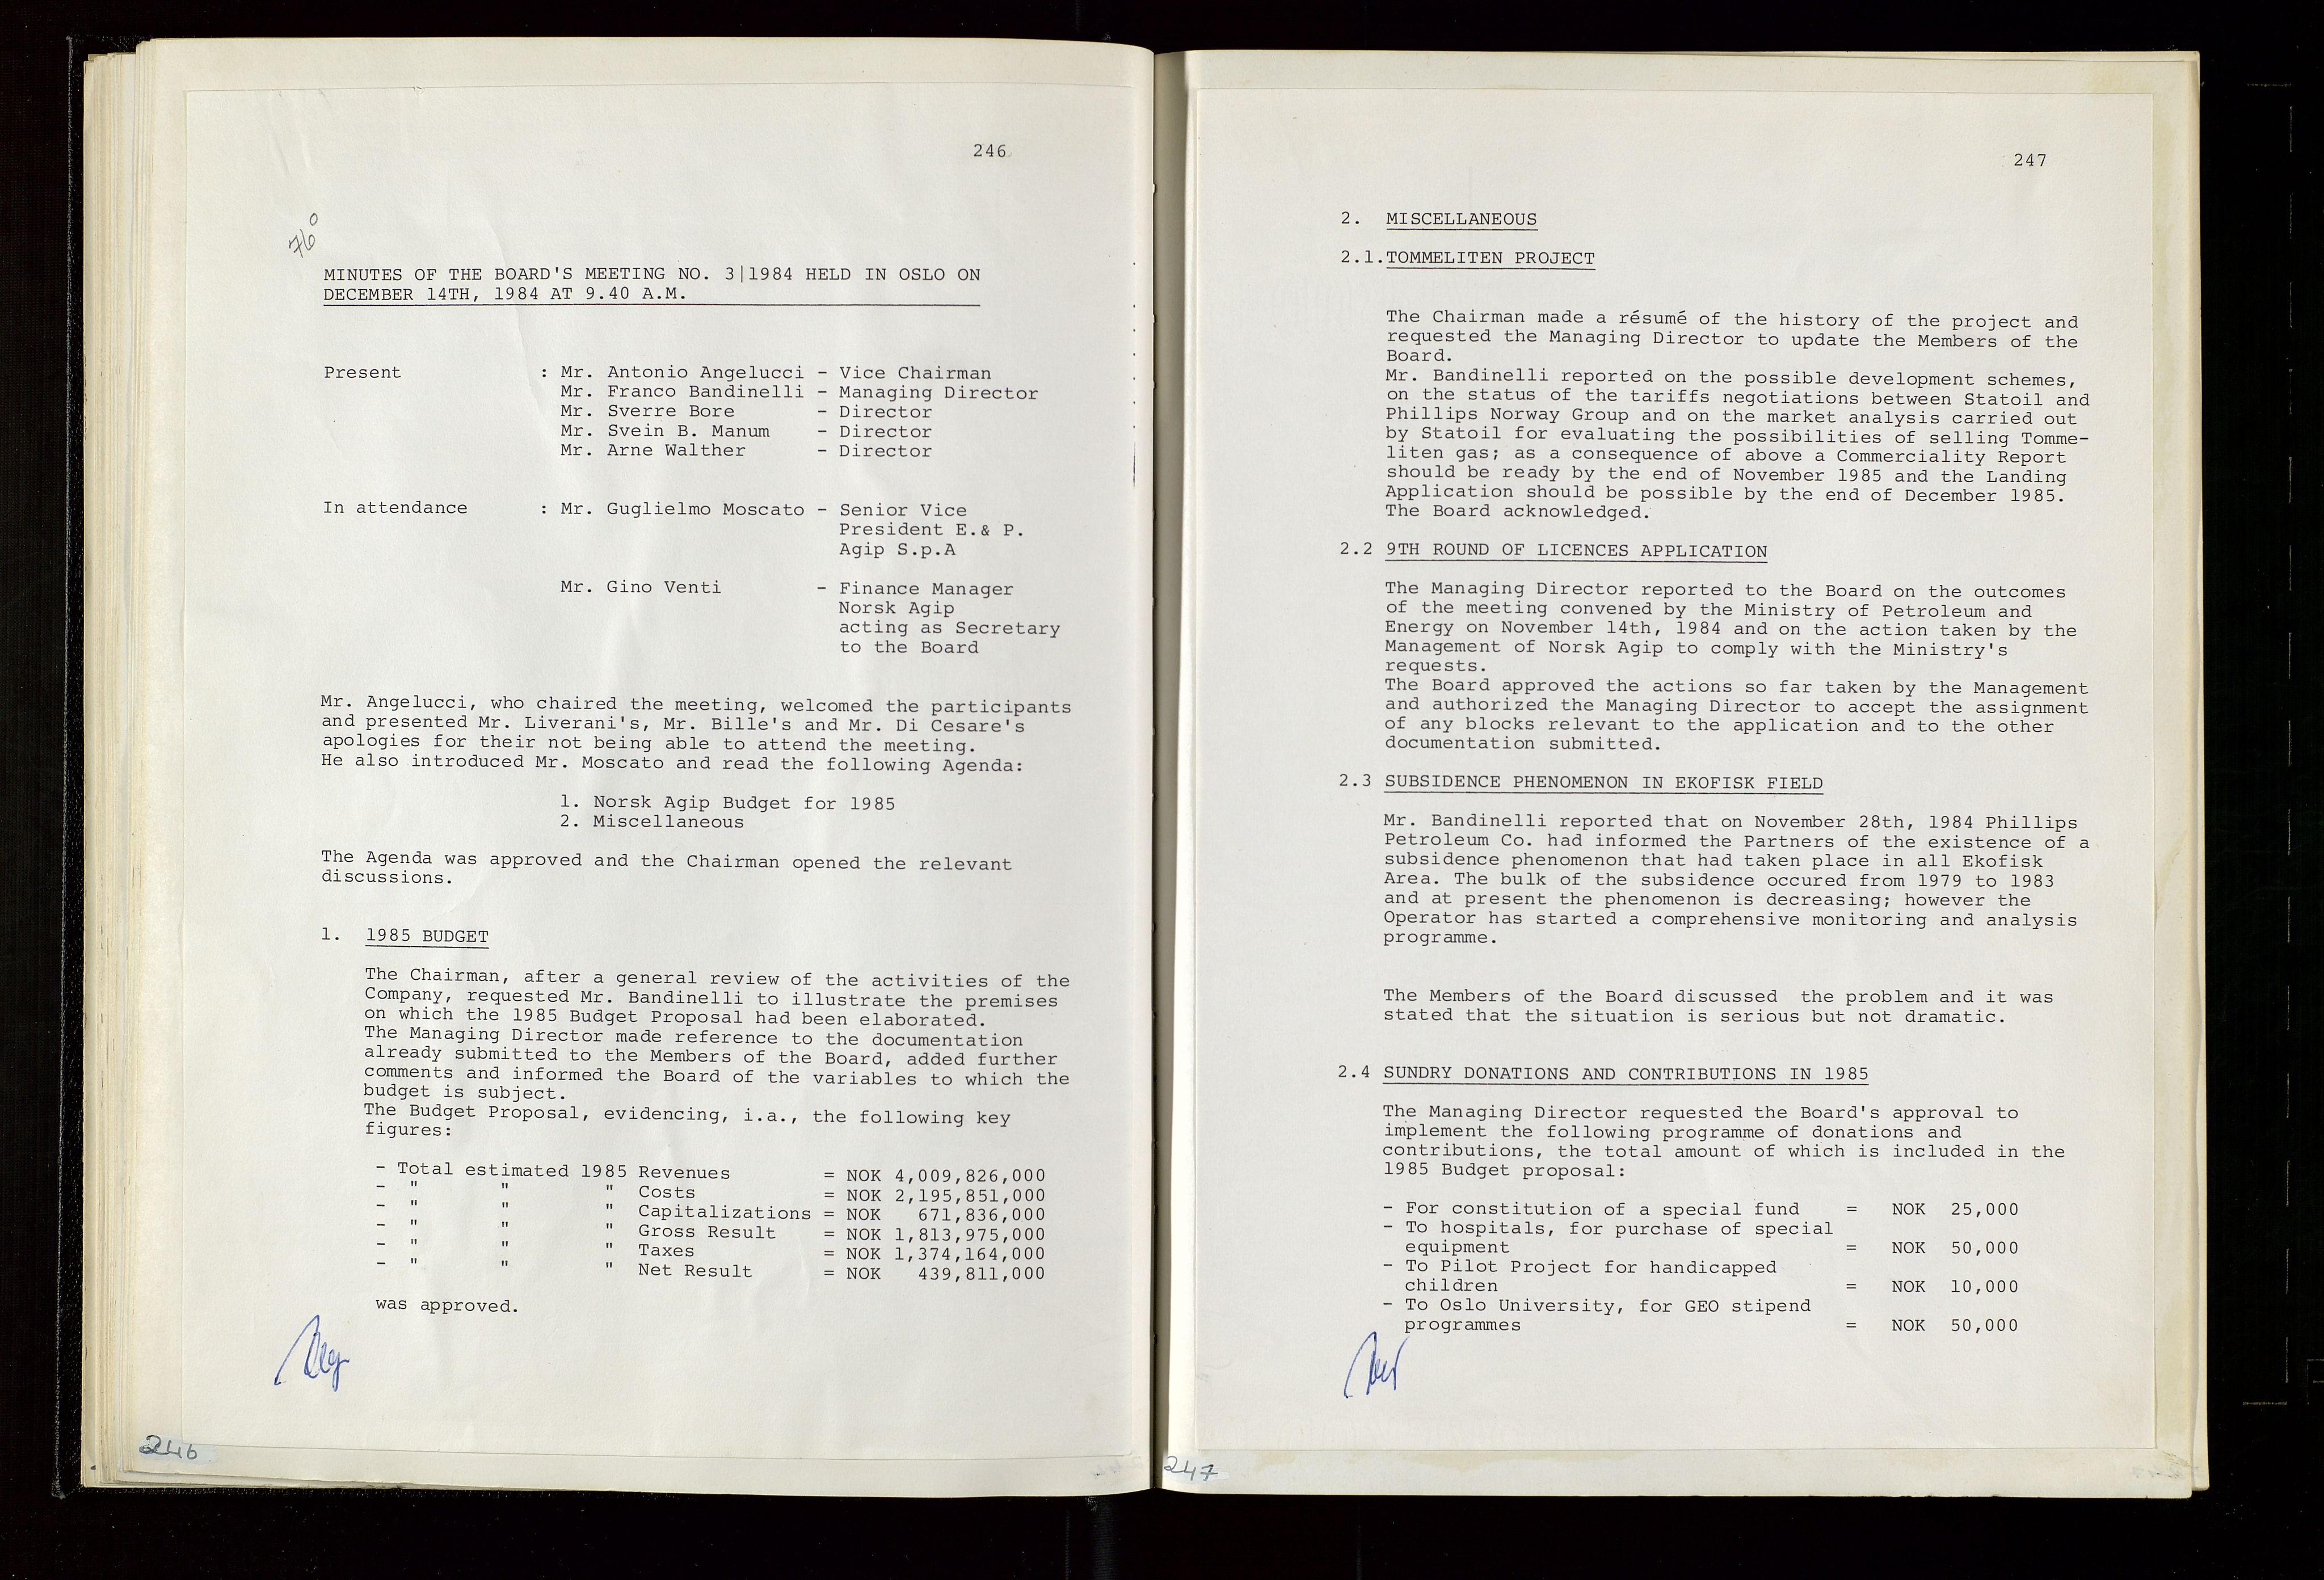 Pa 1583 - Norsk Agip AS, SAST/A-102138/A/Aa/L0003: Board of Directors meeting minutes, 1979-1983, s. 246-247